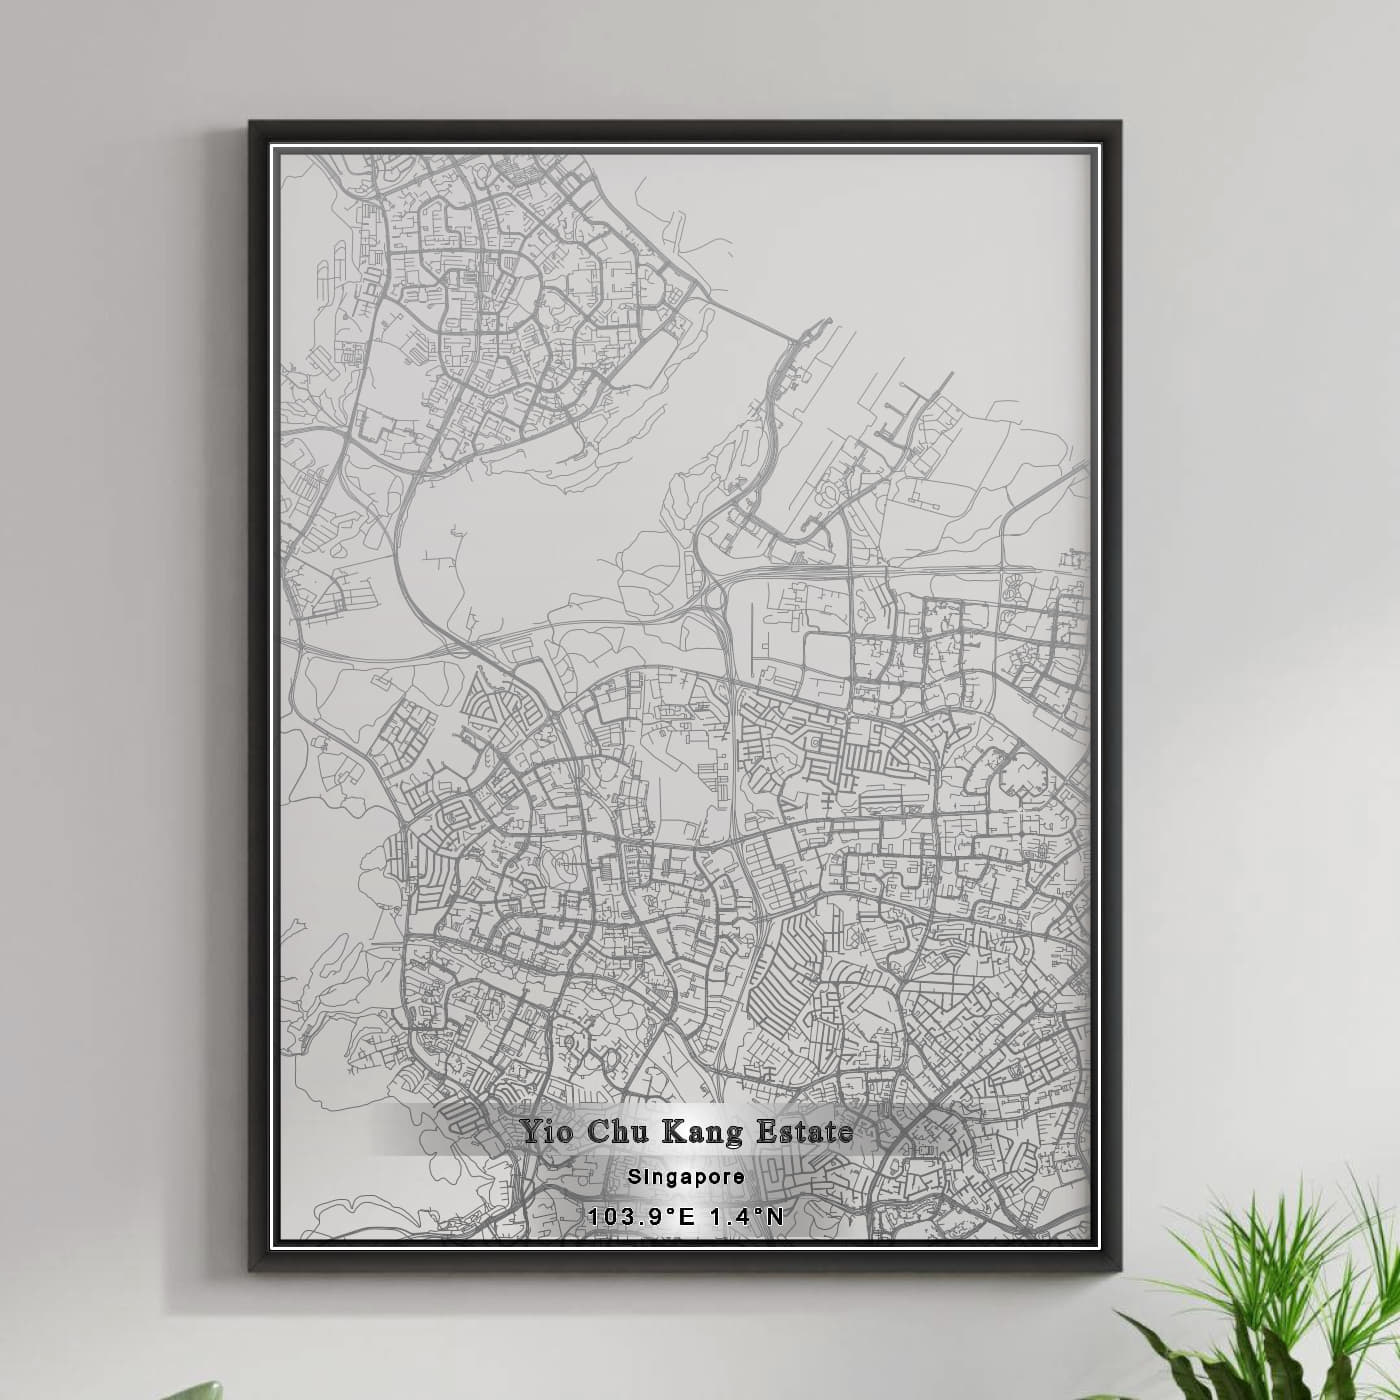 ROAD MAP OF YIO CHU KANG ESTATE, SINGAPORE BY MAPBAKES